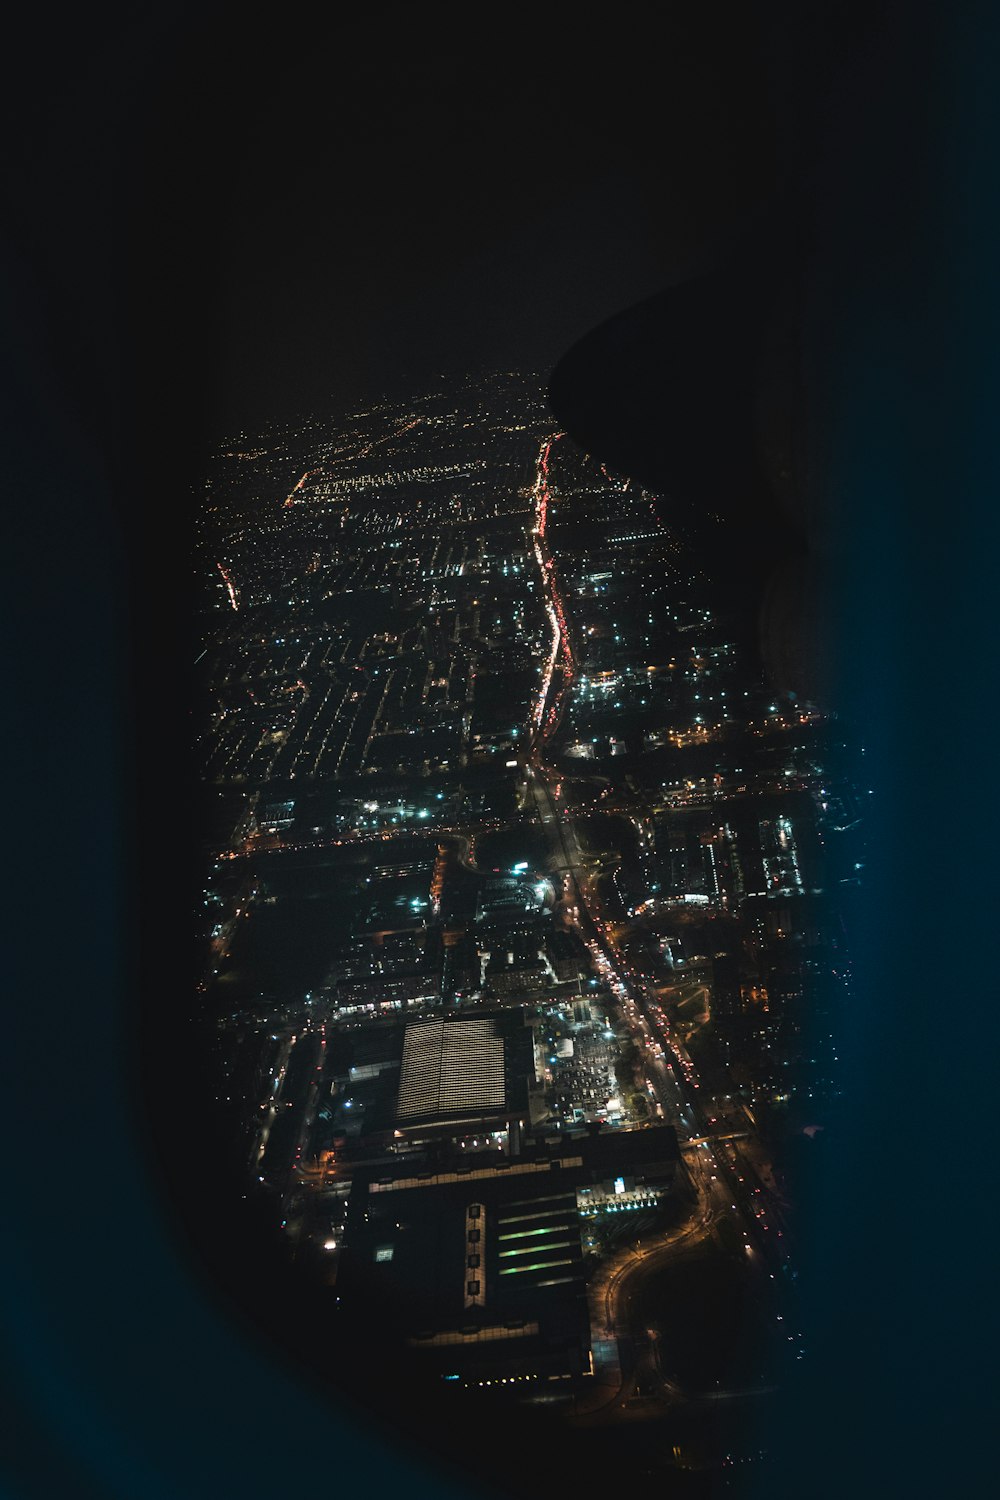 aerial view of city during night time